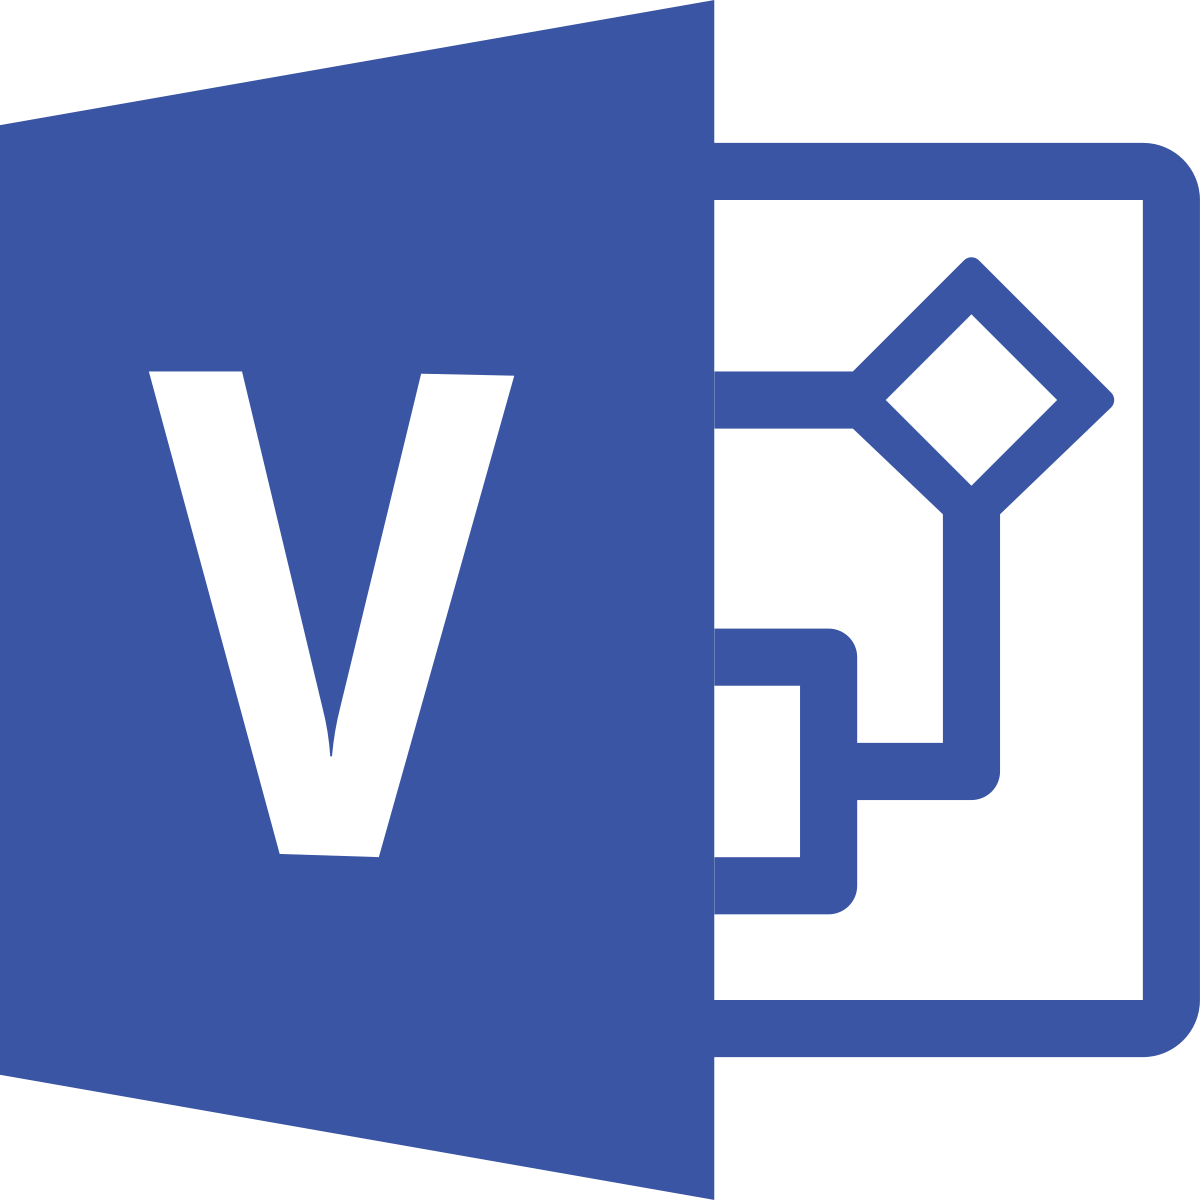 Windows visio download 10 mb text file download